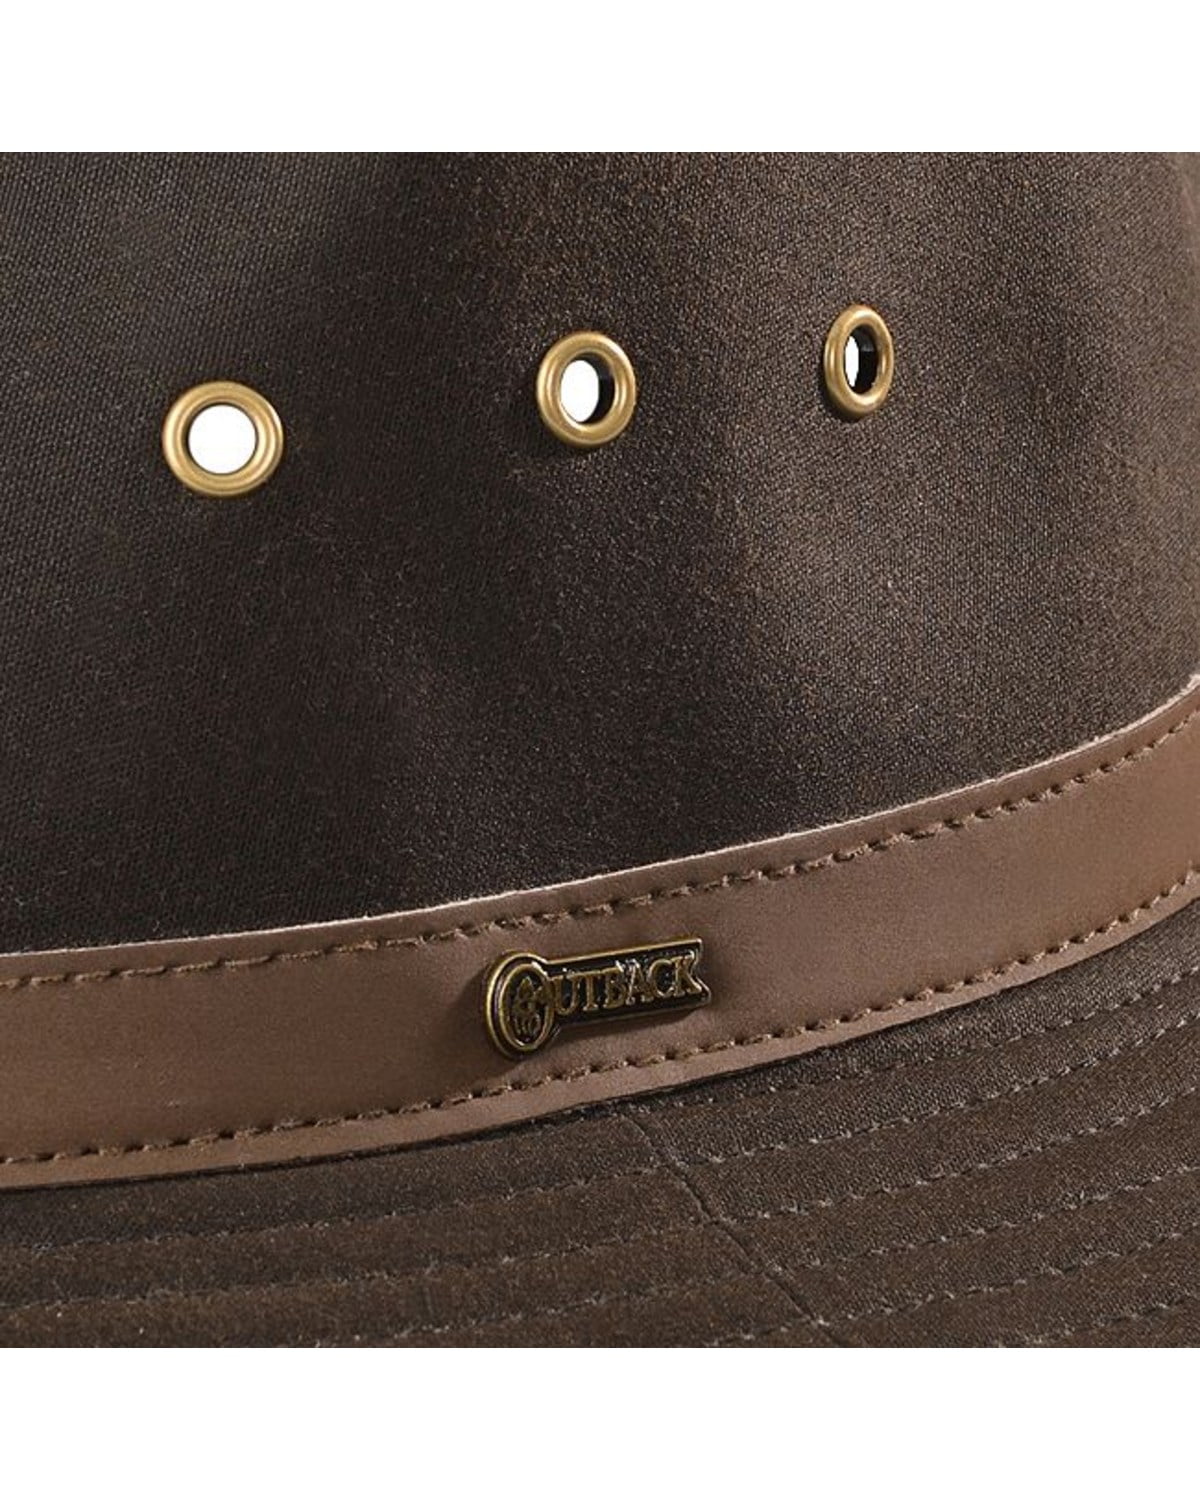 Outback Trading Hat Mens Quality Madison River Oilskin Leather 1462 